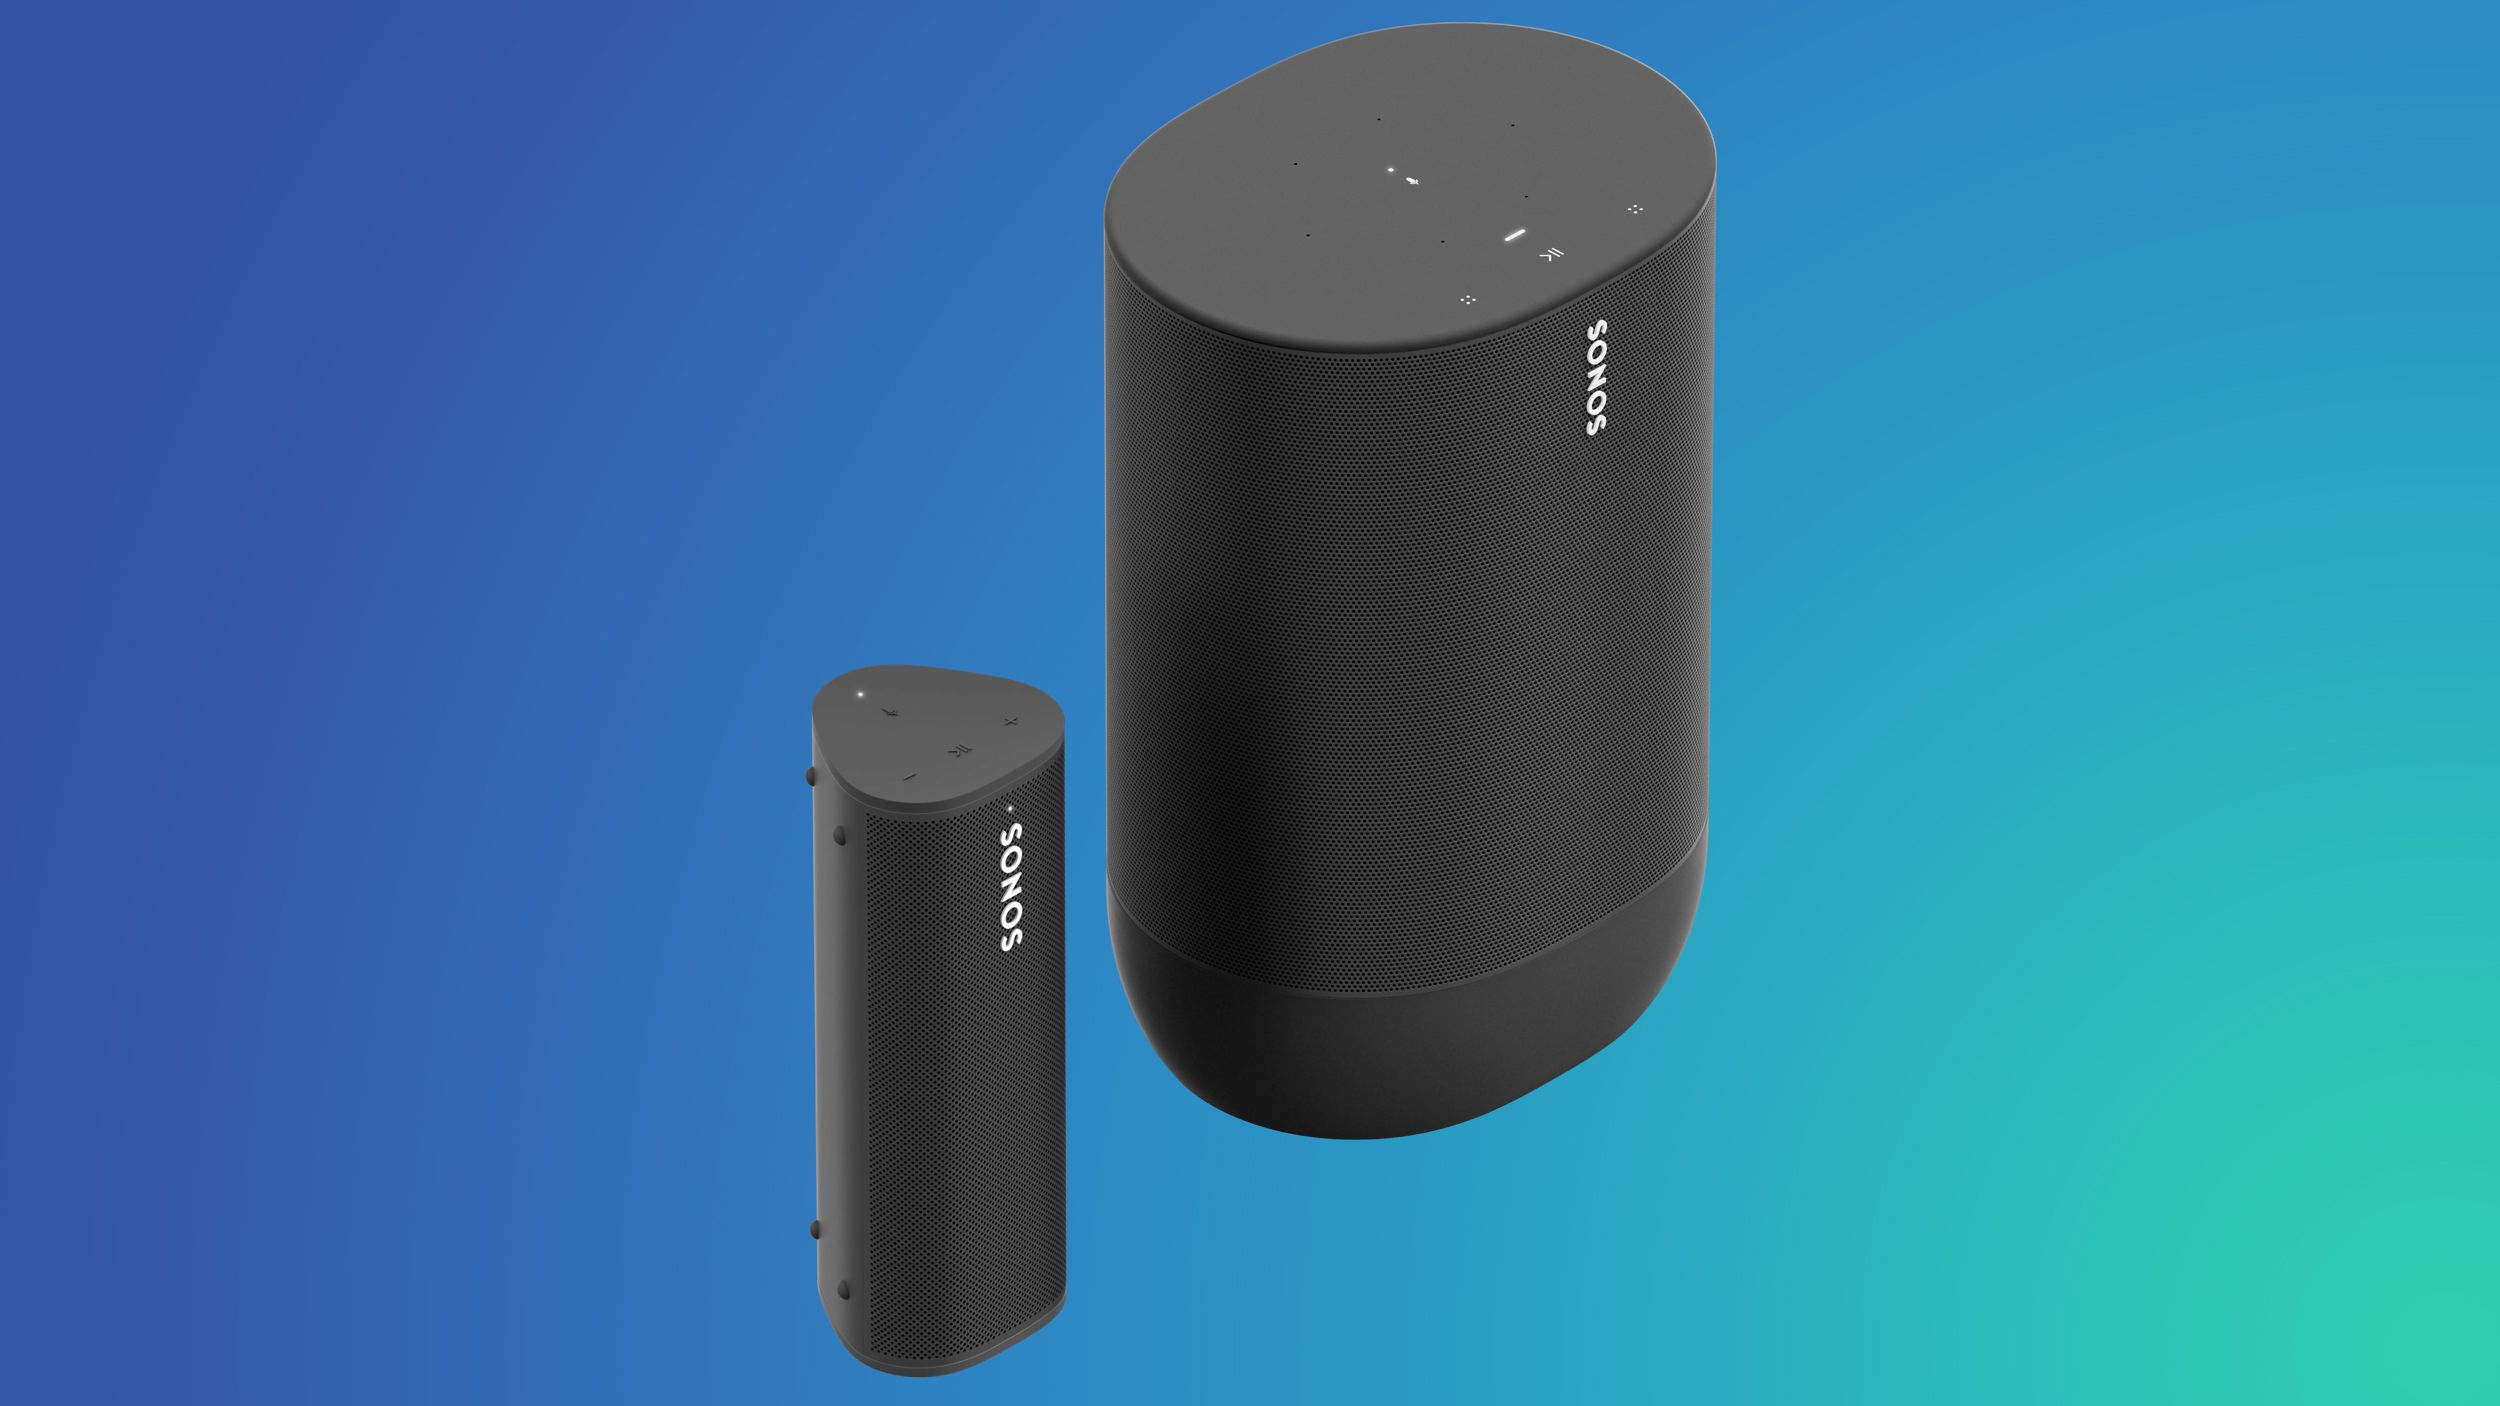 Deals: Sonos Takes Up to 25% Off Speakers and Sound Bars in New Summer Sale - macrumors.com